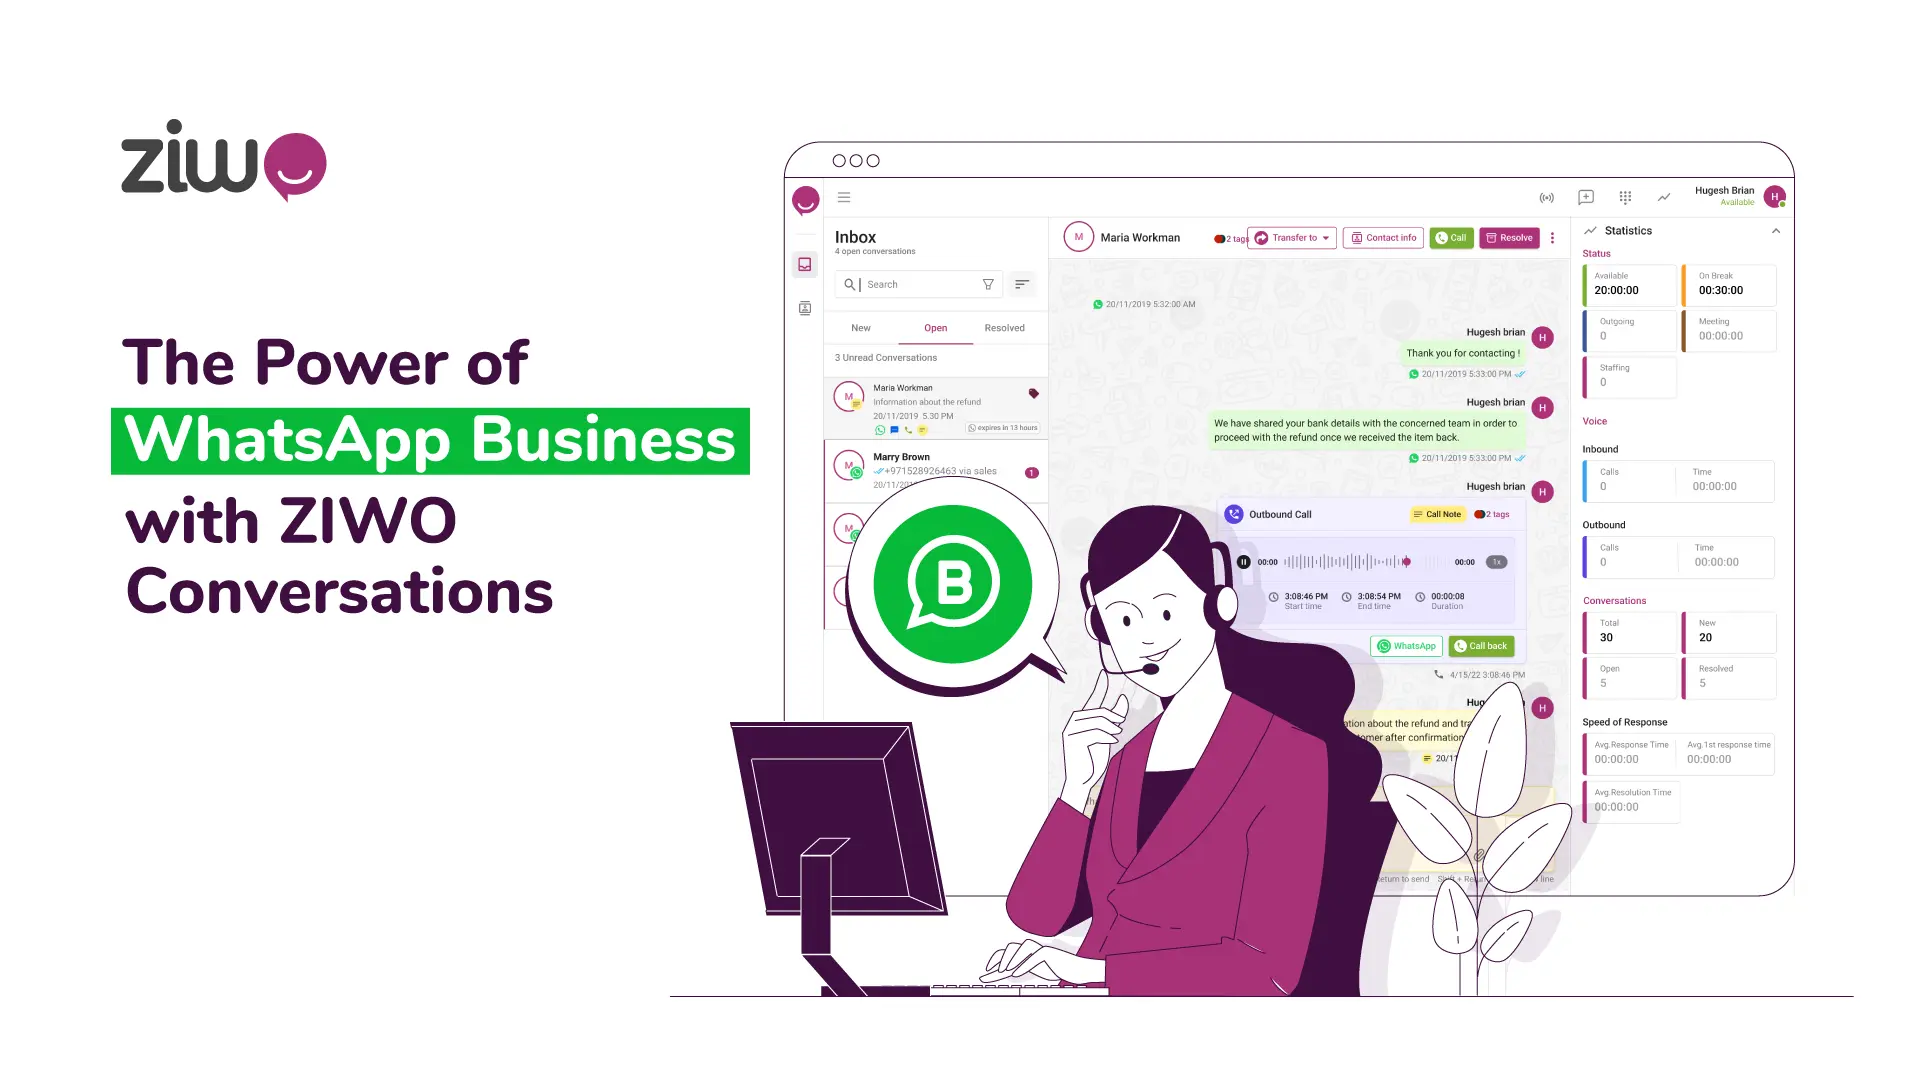 The power of whatsapp business with ziwo conversations